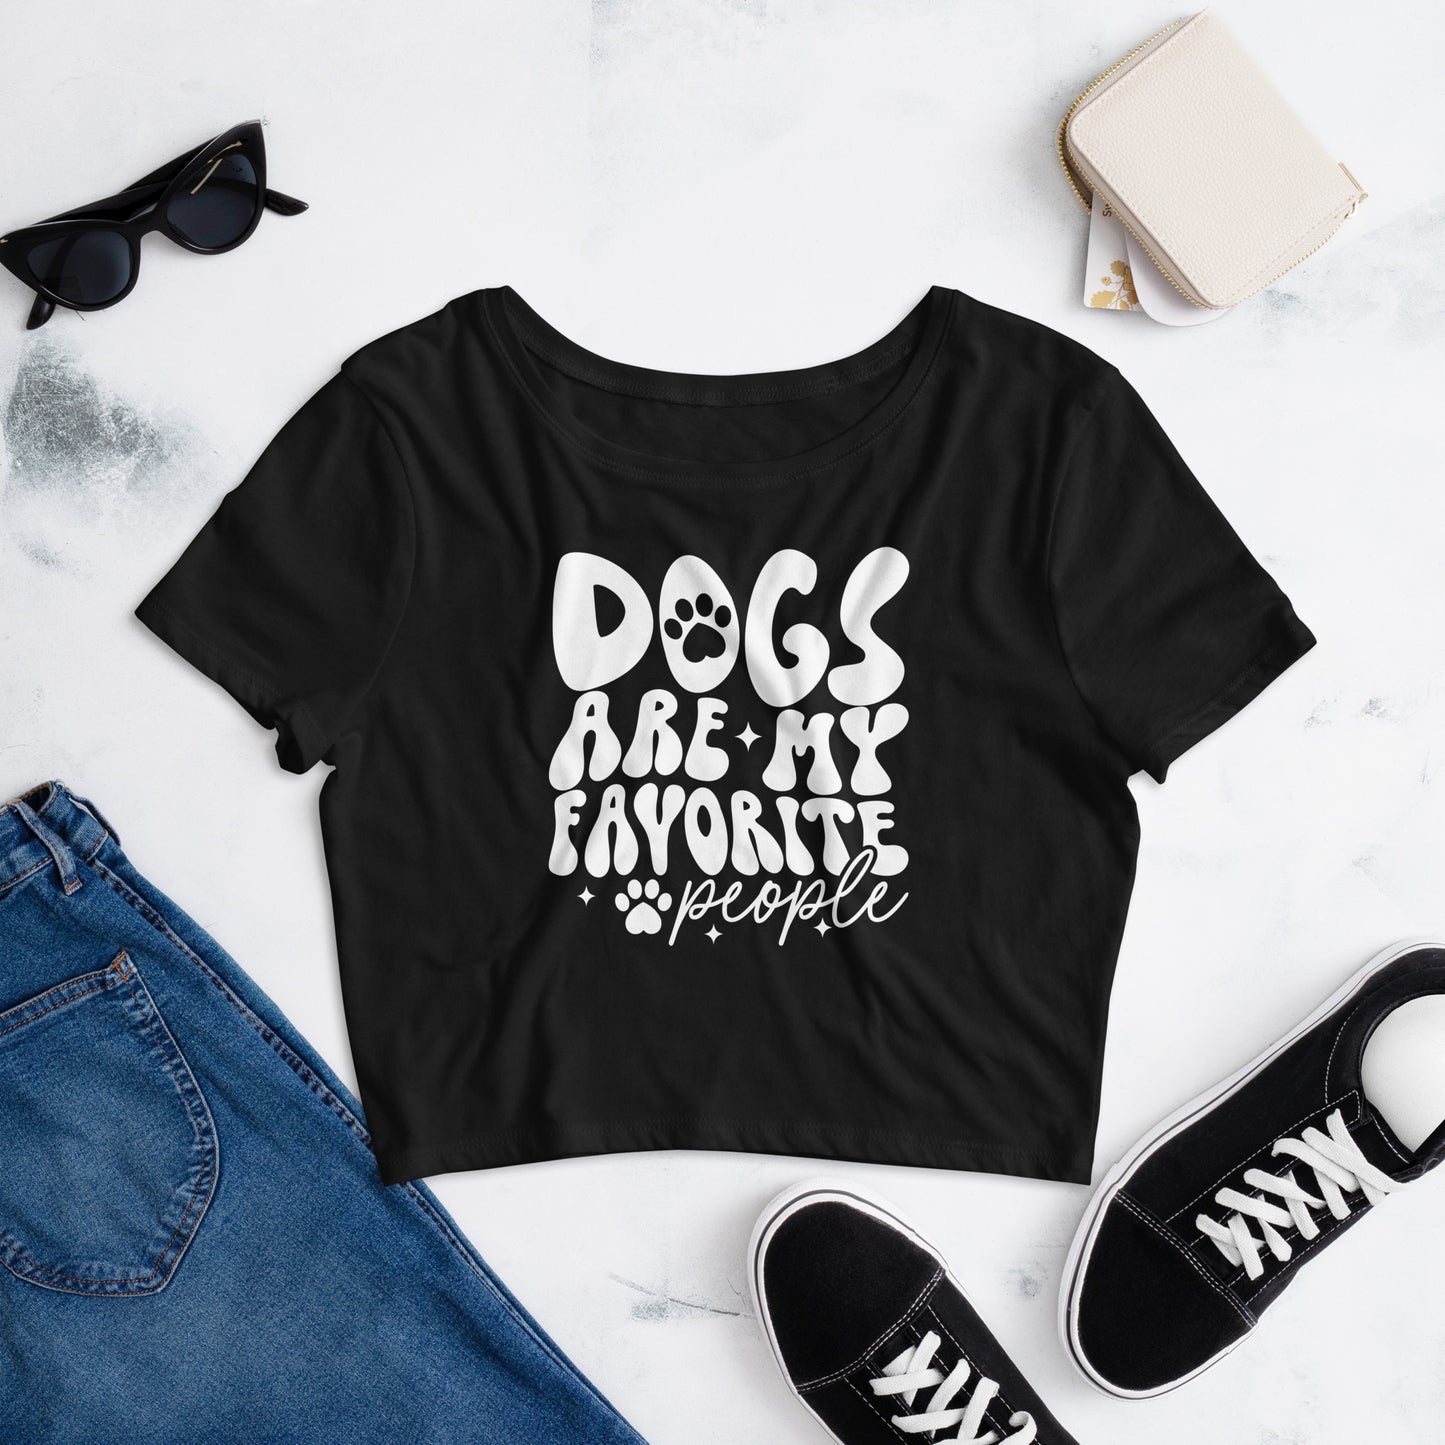 Dogs are My Favorite People Women’s Crop Tee